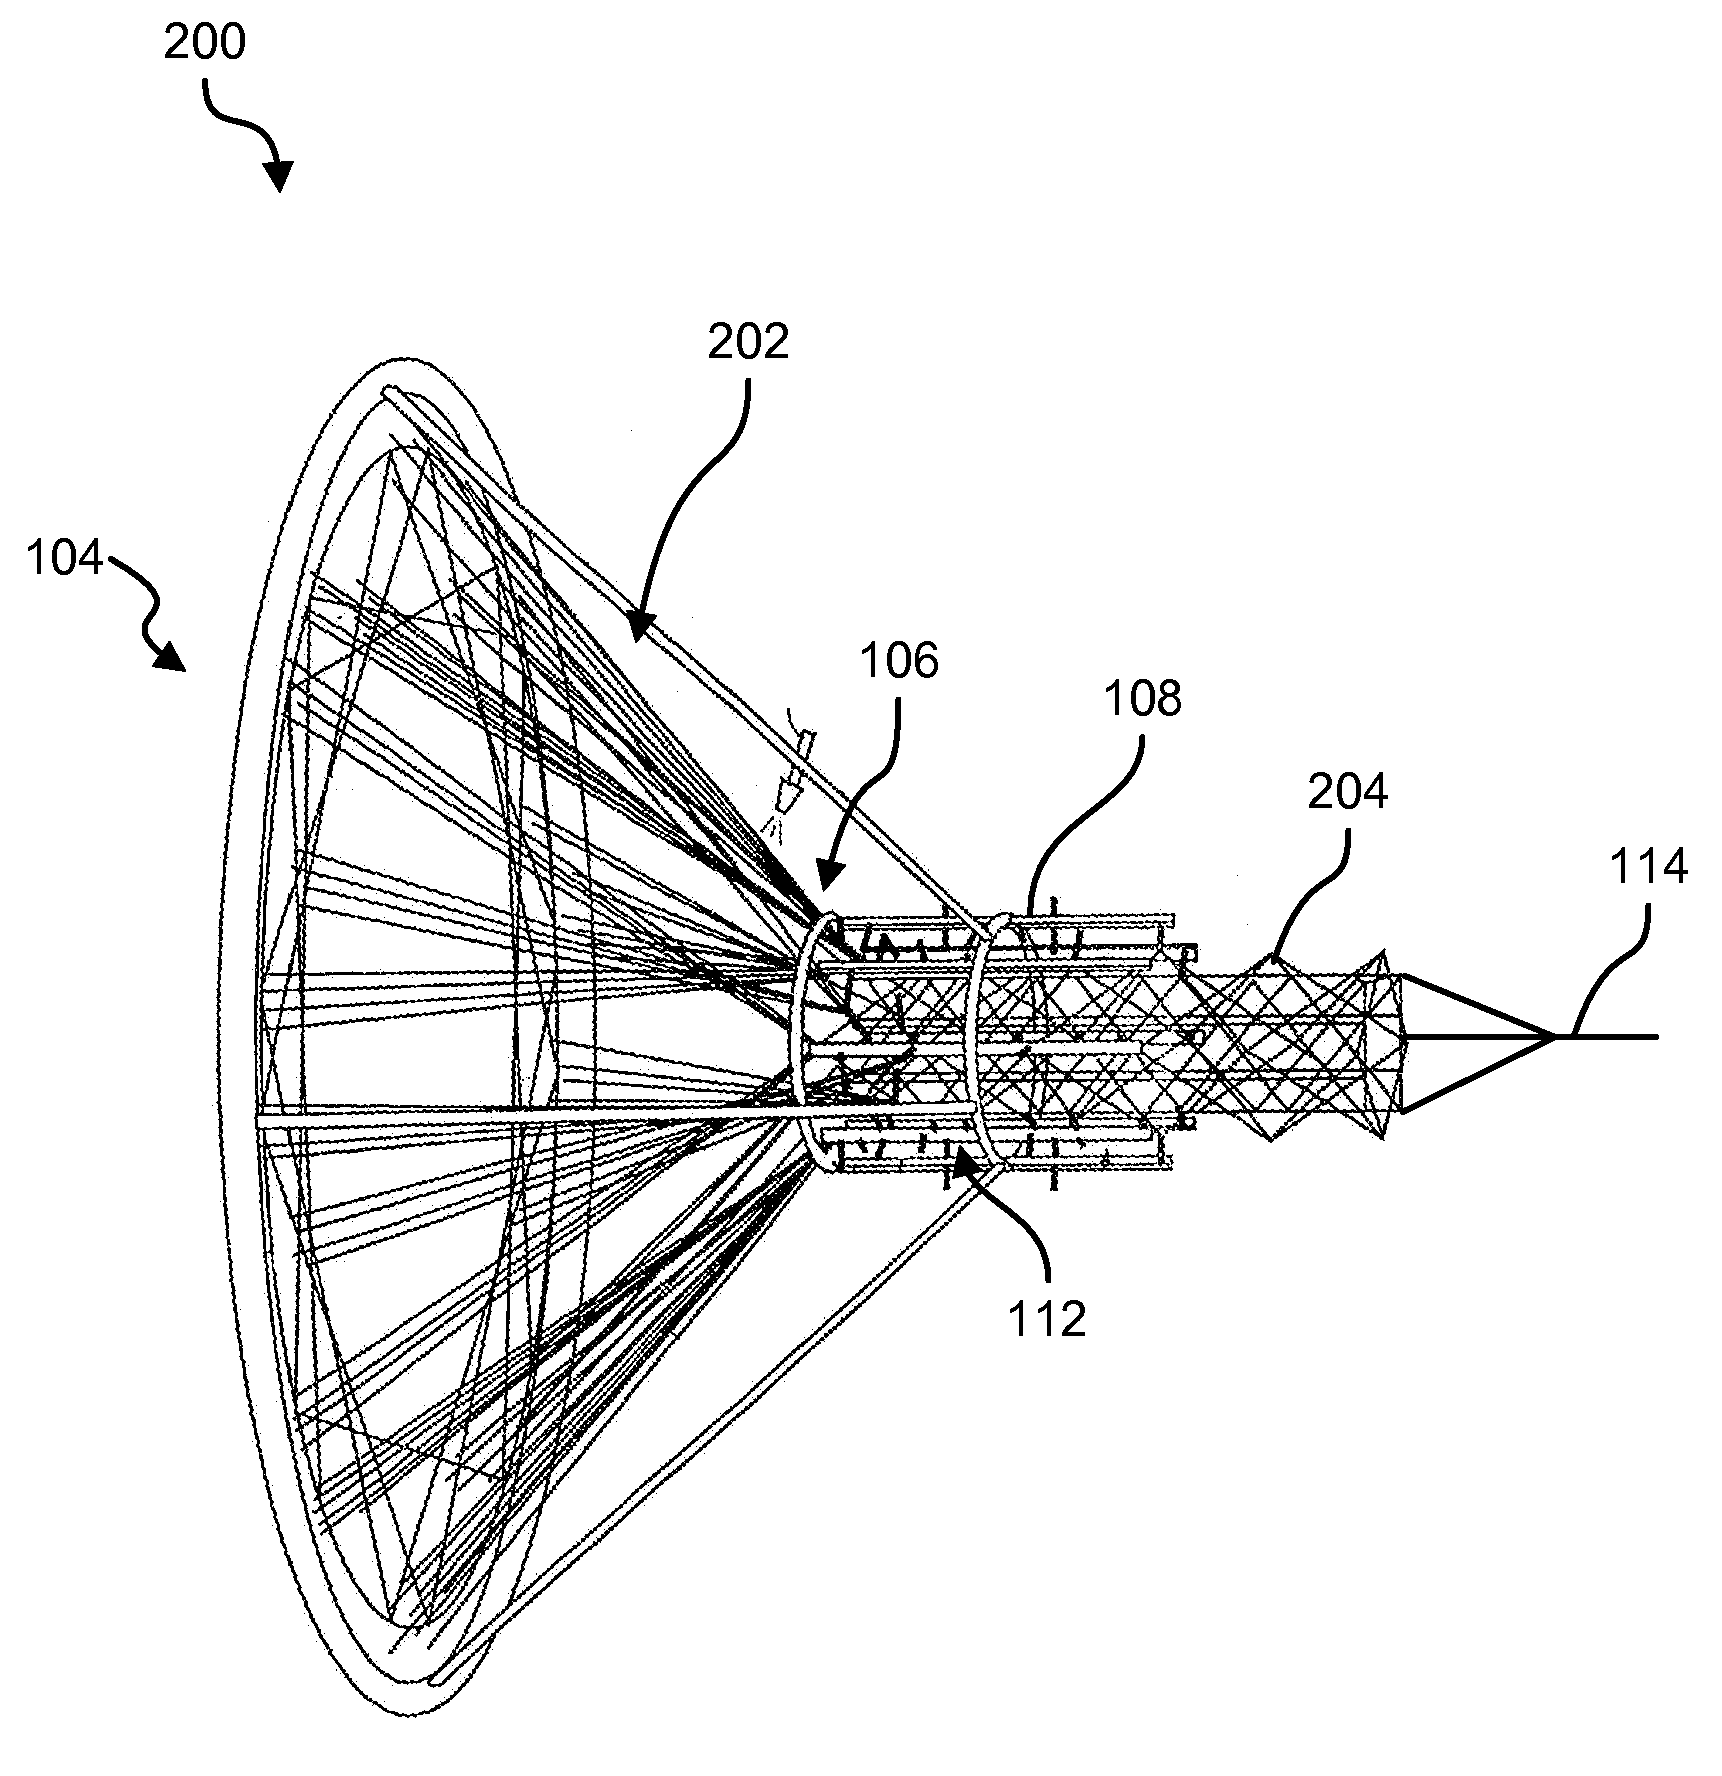 Apparatus, System, and Method for Filamentary Composite Lattice Structure Manufacturing